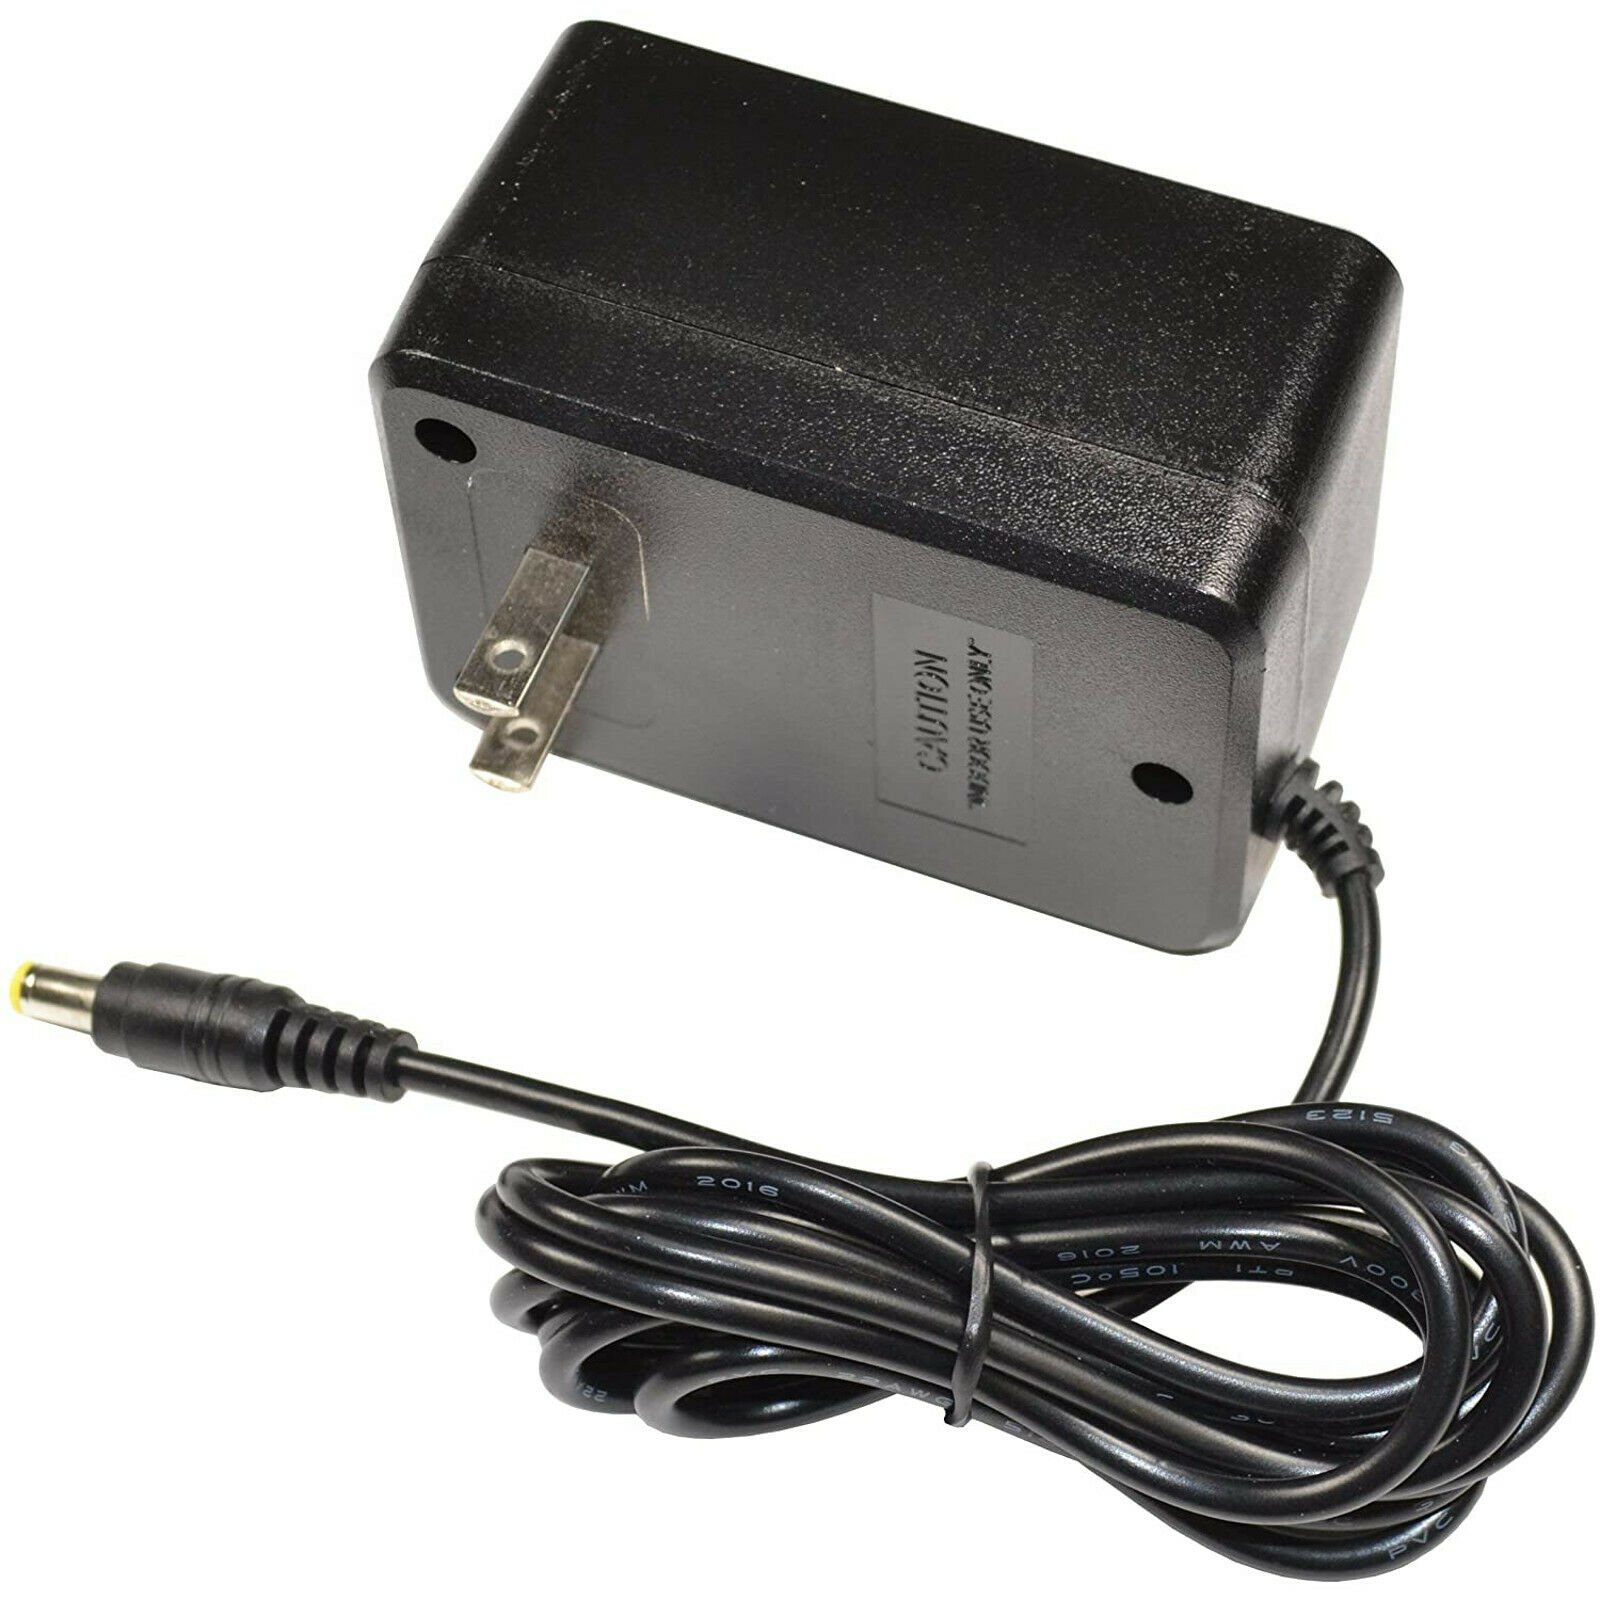 12V AC Adapter for COLEMAN 5342 5348 Lanterns Power Supply Battery Charger 12V AC Power Adapter / Battery Charger compa